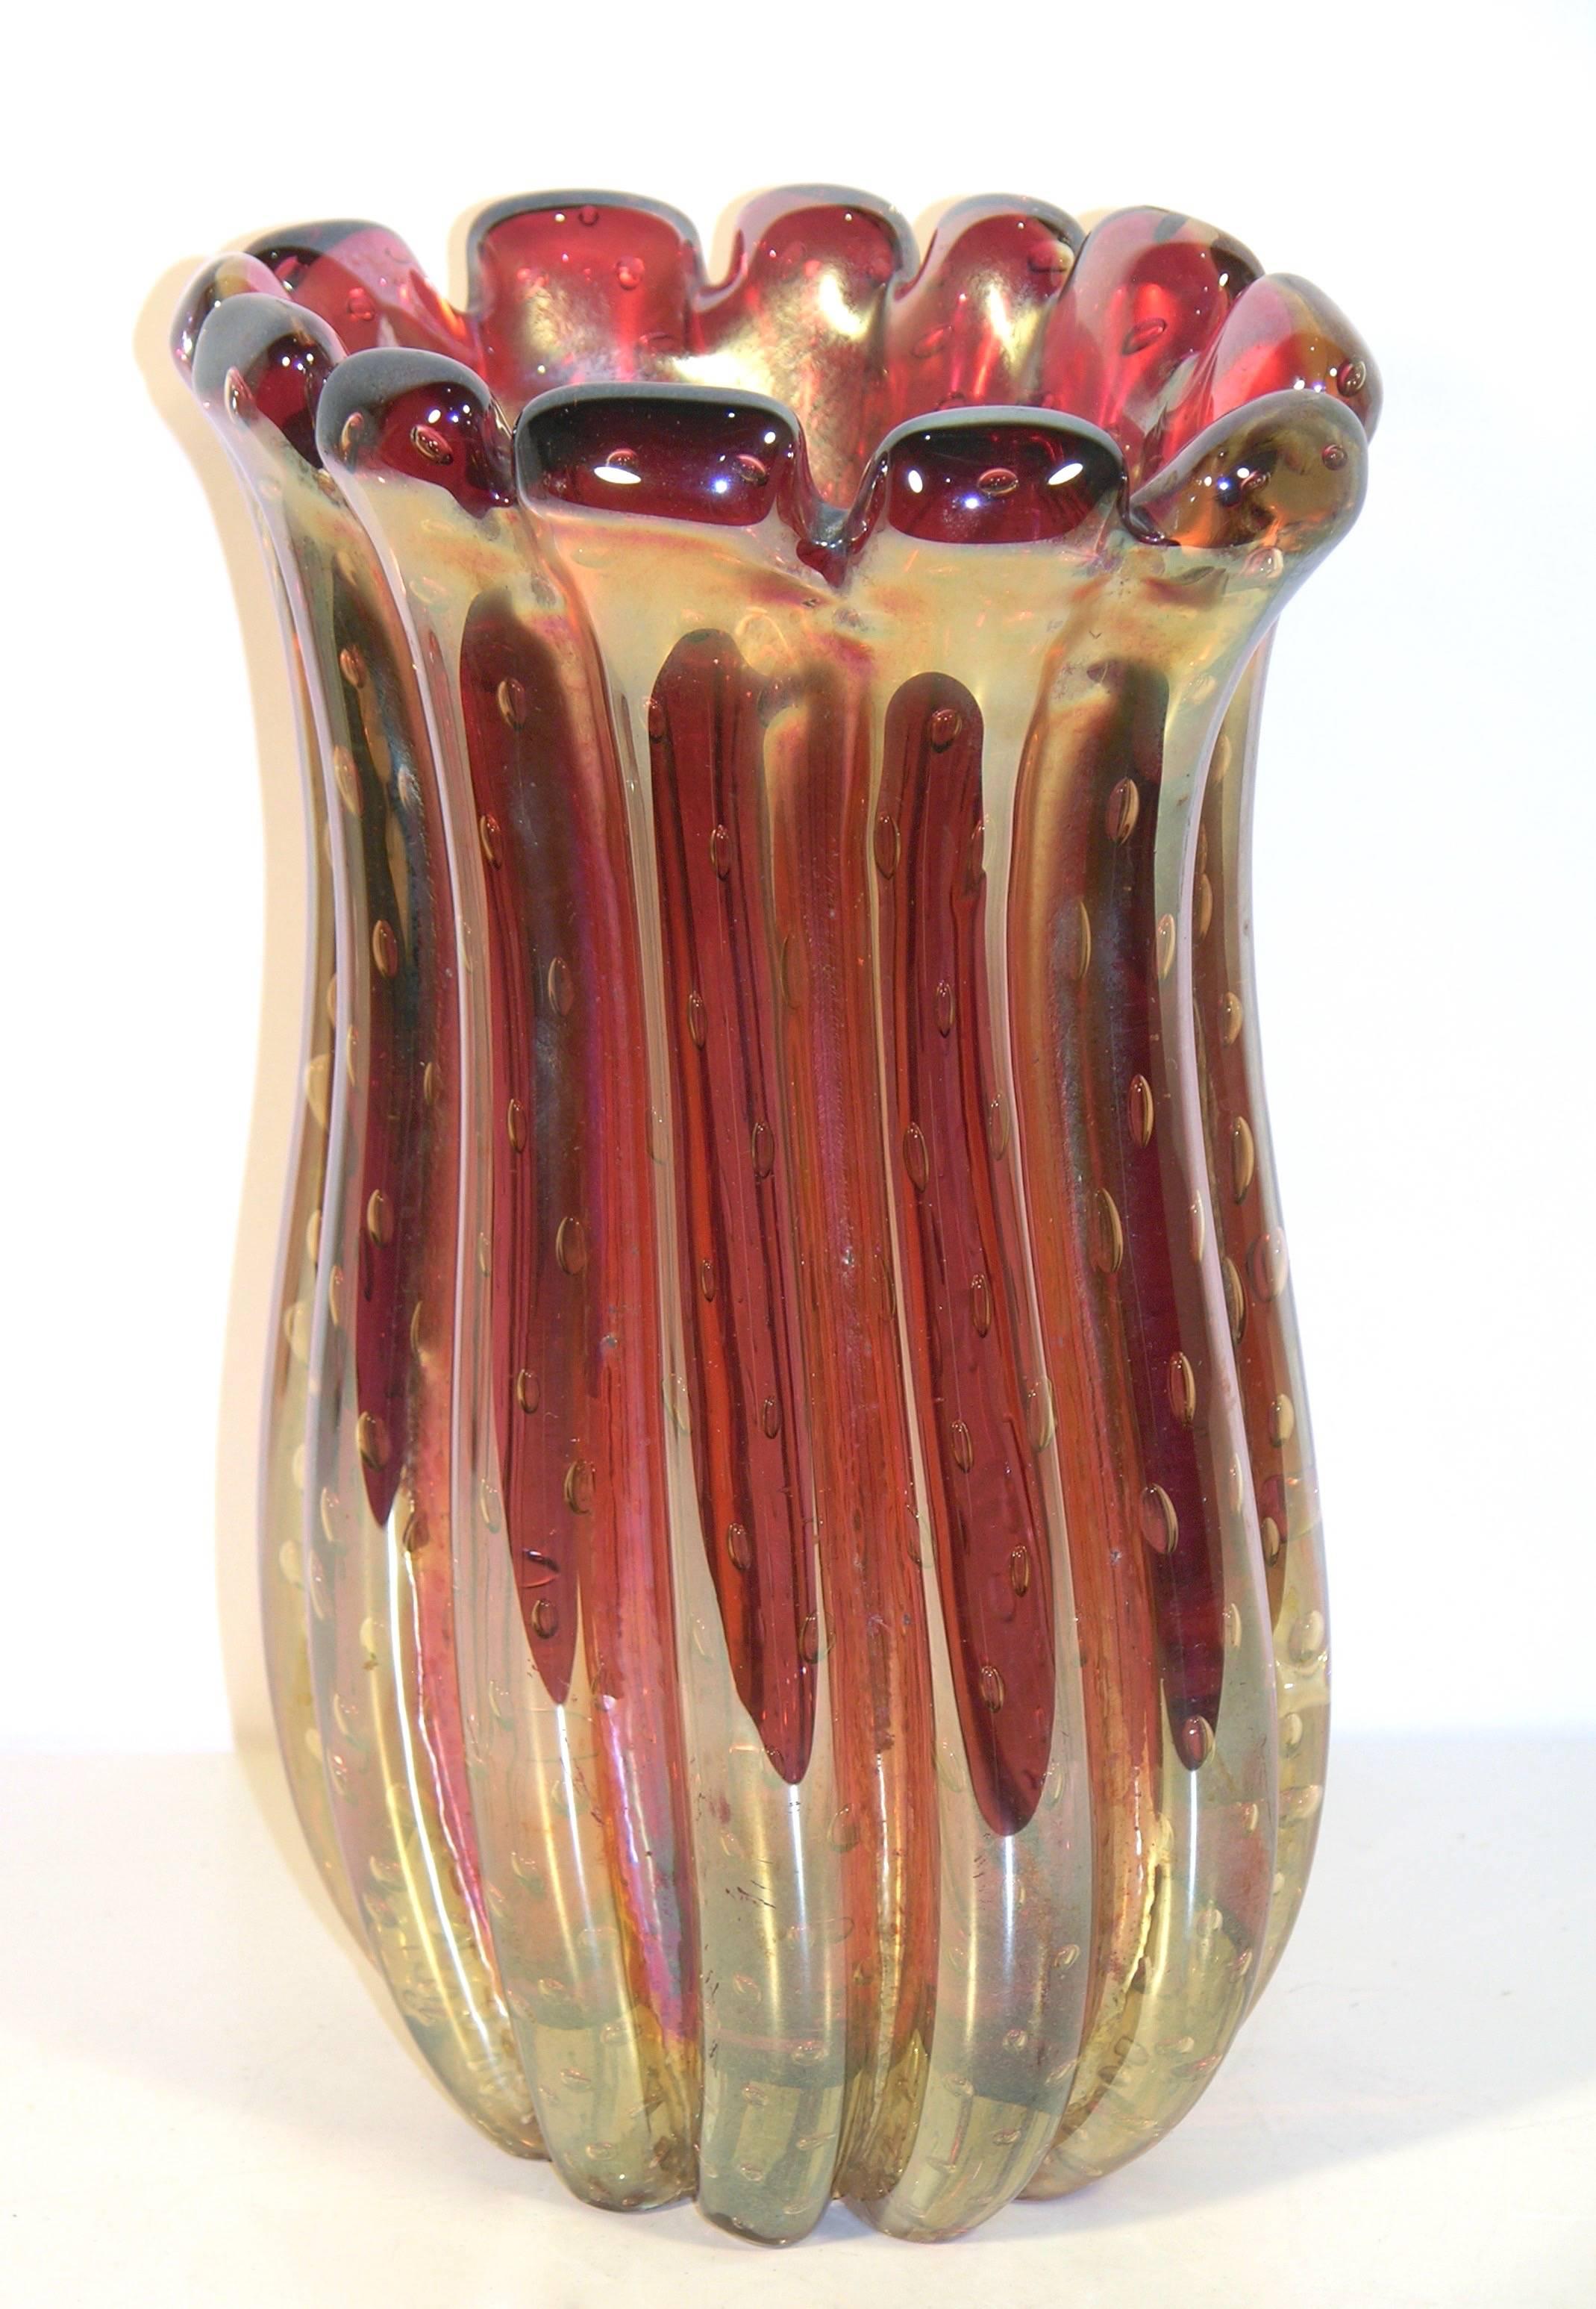 A very attractive vase attributed to Ercole Barovier with a turned out shape, the body has a sophisticated ribbed decor with a scalloped edge, the Murano glass is worked with Bulicante, bubbles blown in the glass that add texture and with a deep